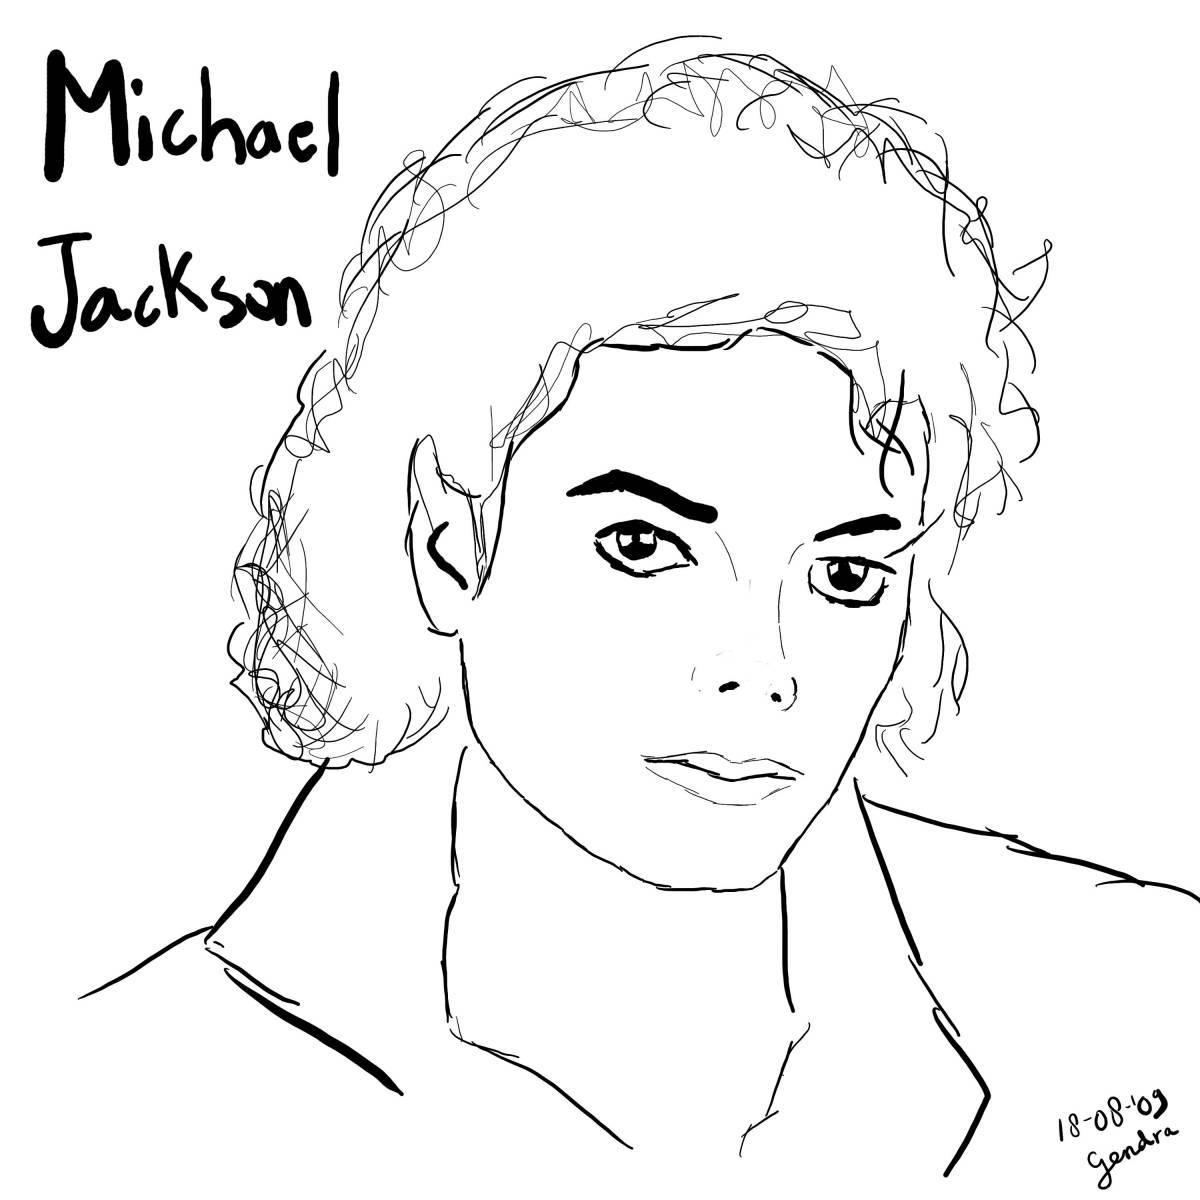 Exquisite coloring by michael jackson